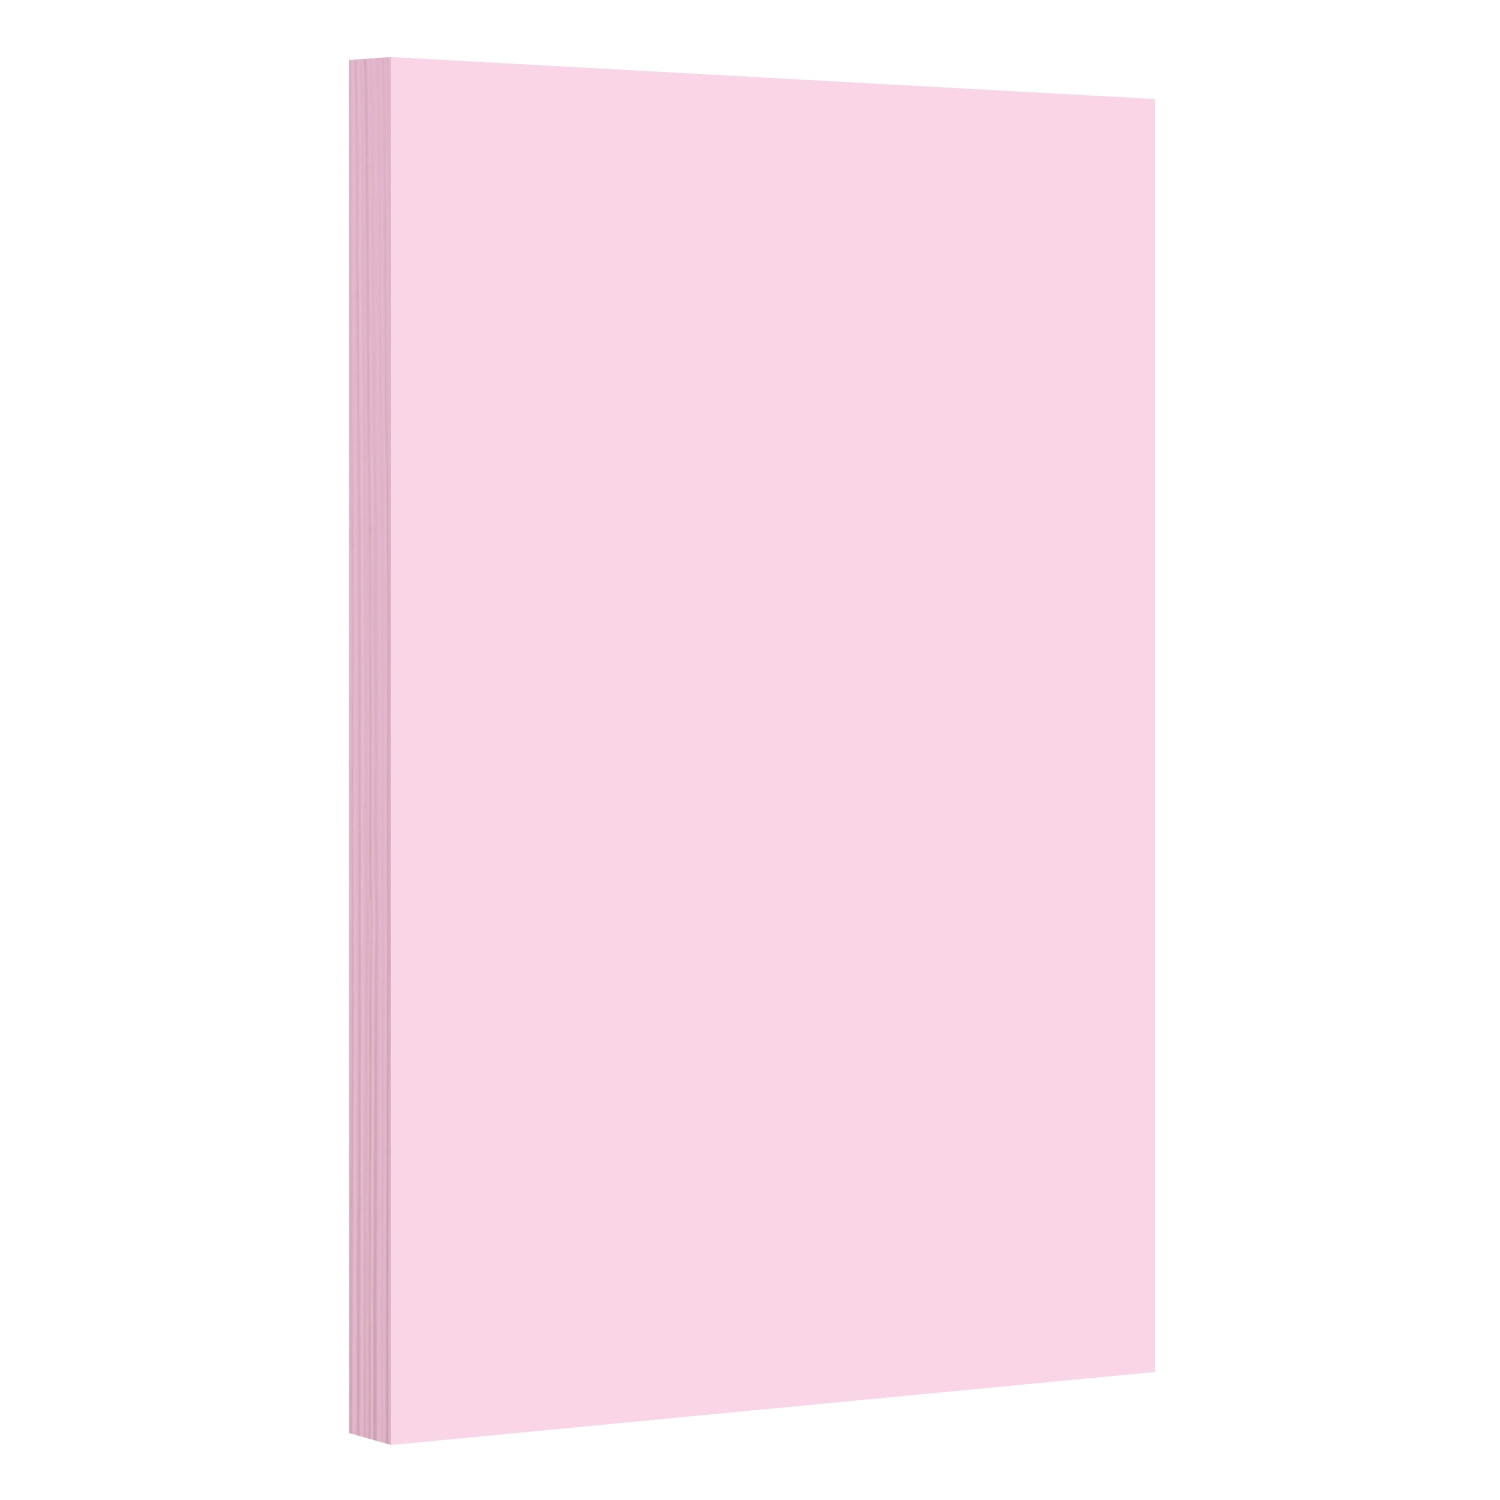 Light Pink Paper - 25 x 38 in 70 lb Text Smooth 30% Recycled